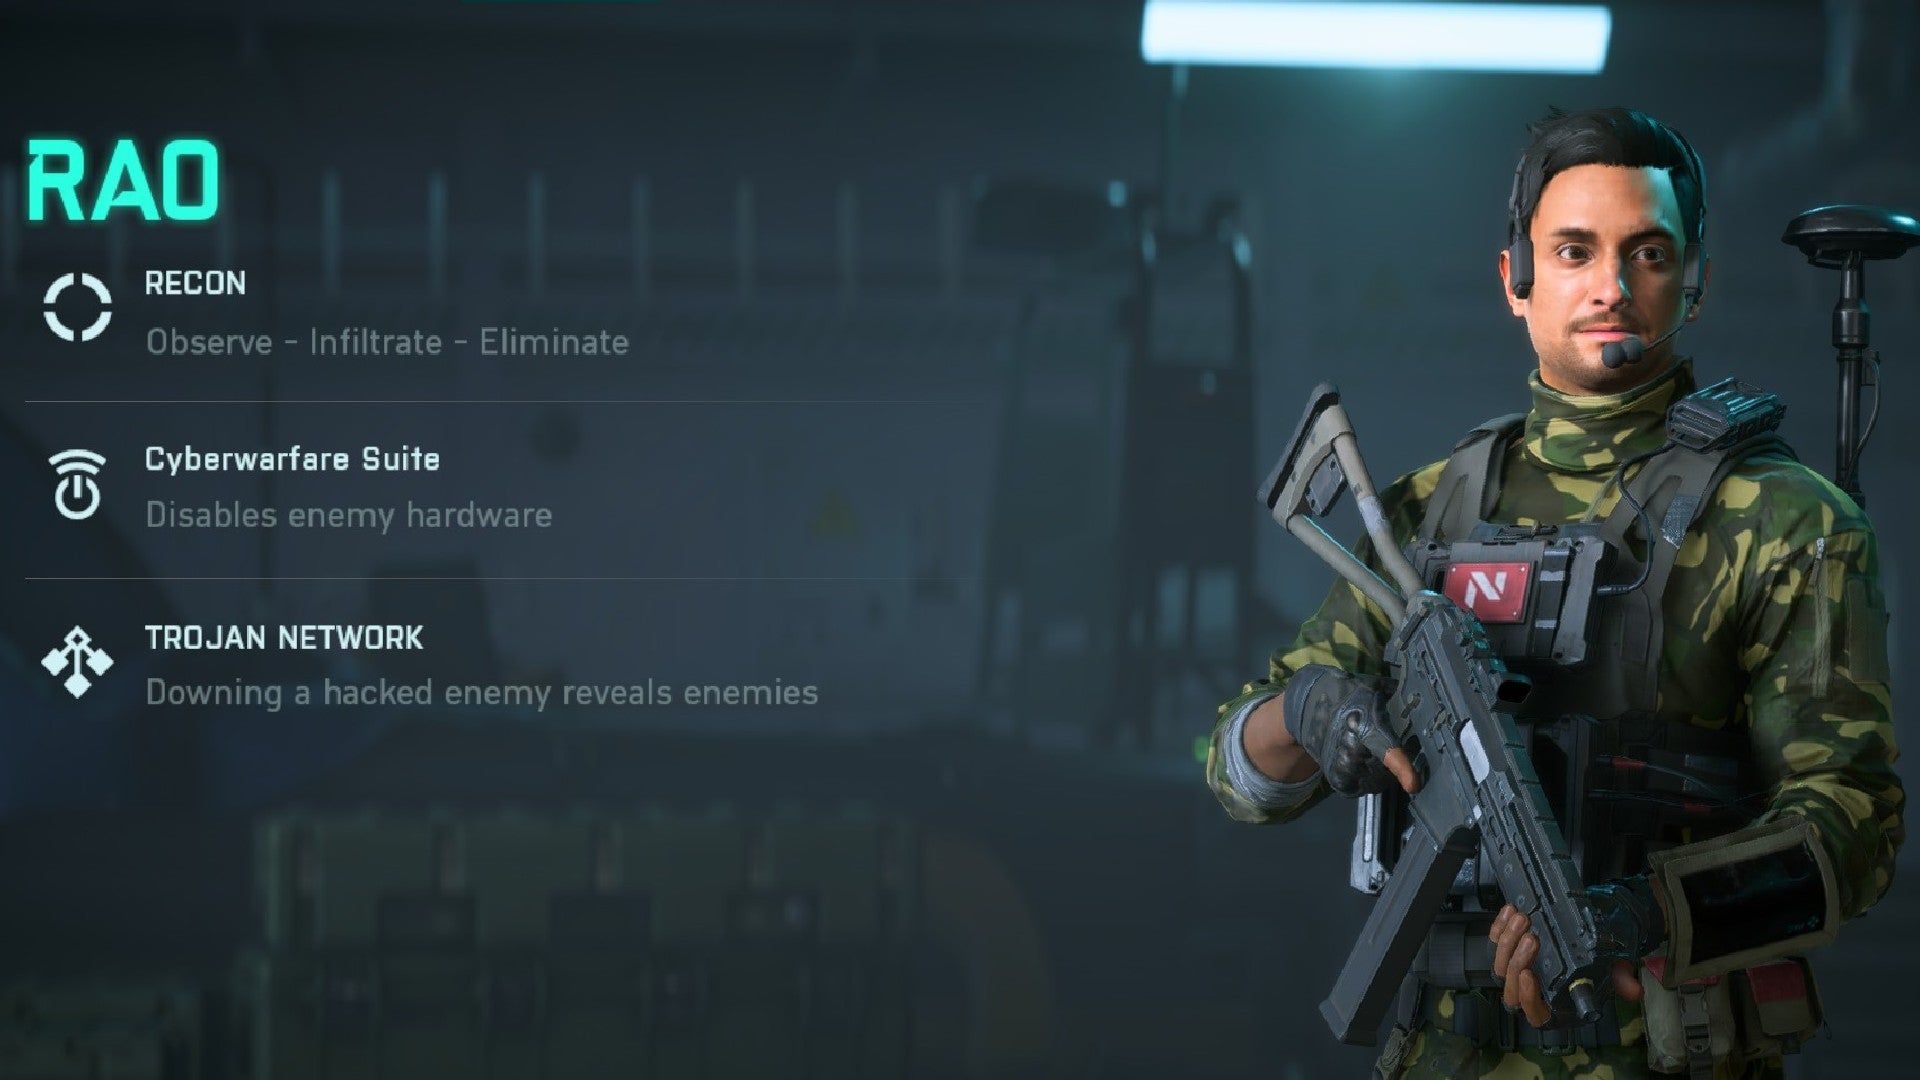 Rao stood holding an SMG in the specialist selection menu. Text on the left describes his abilities.